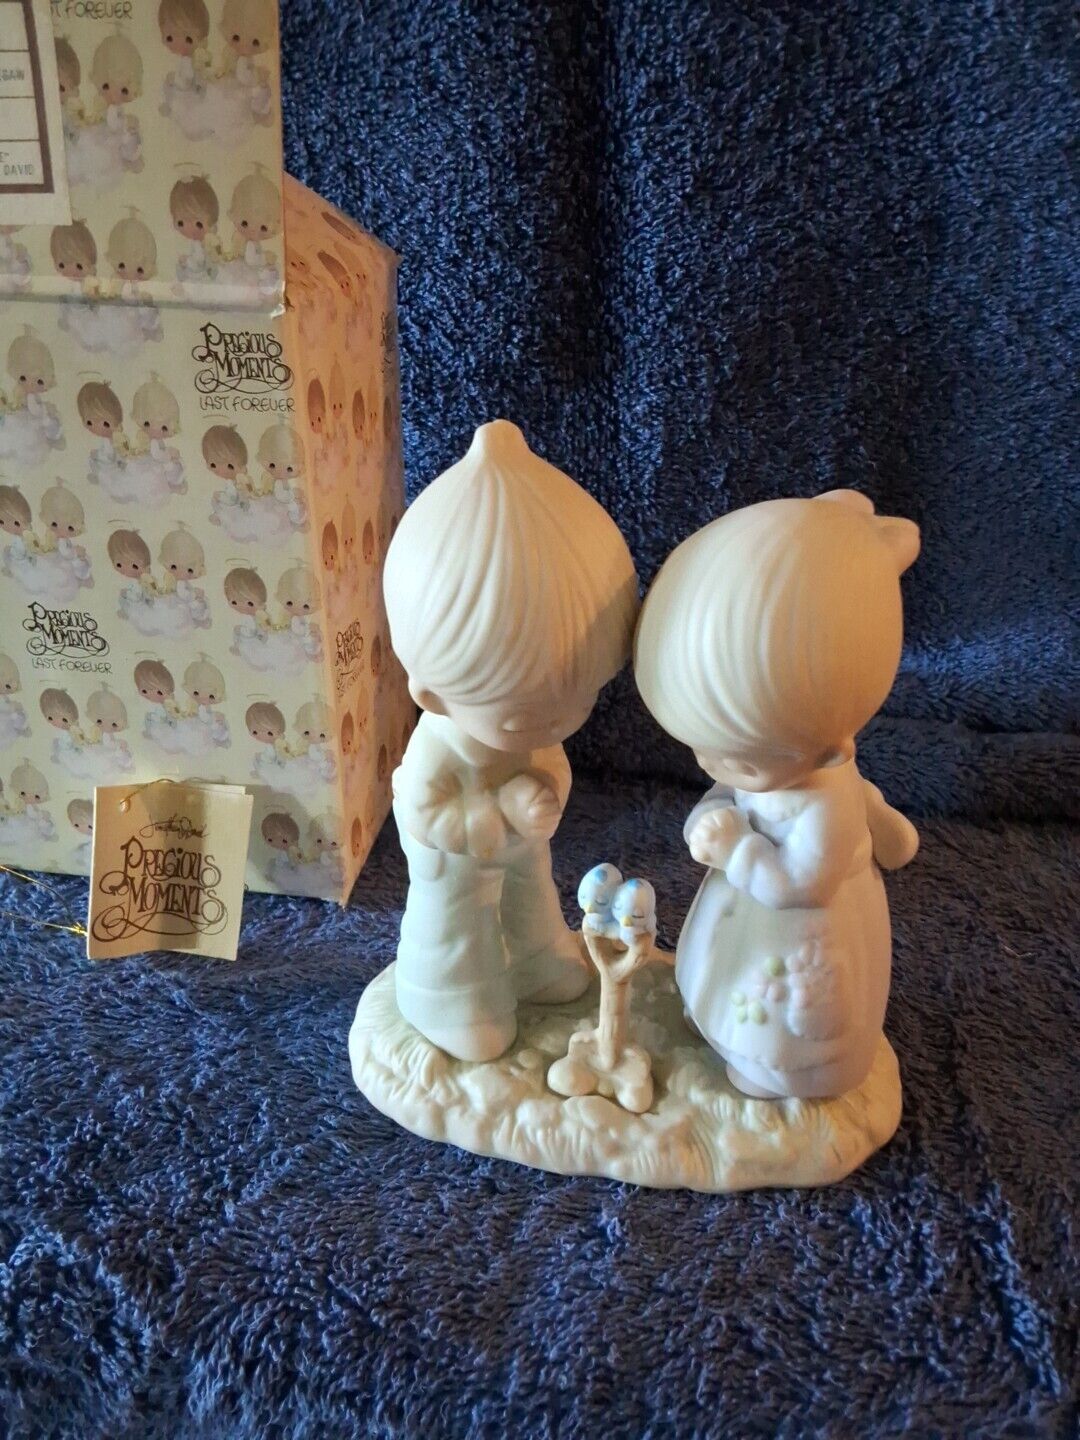 Precious Moments Figurine “Prayer Changes Things” 1976